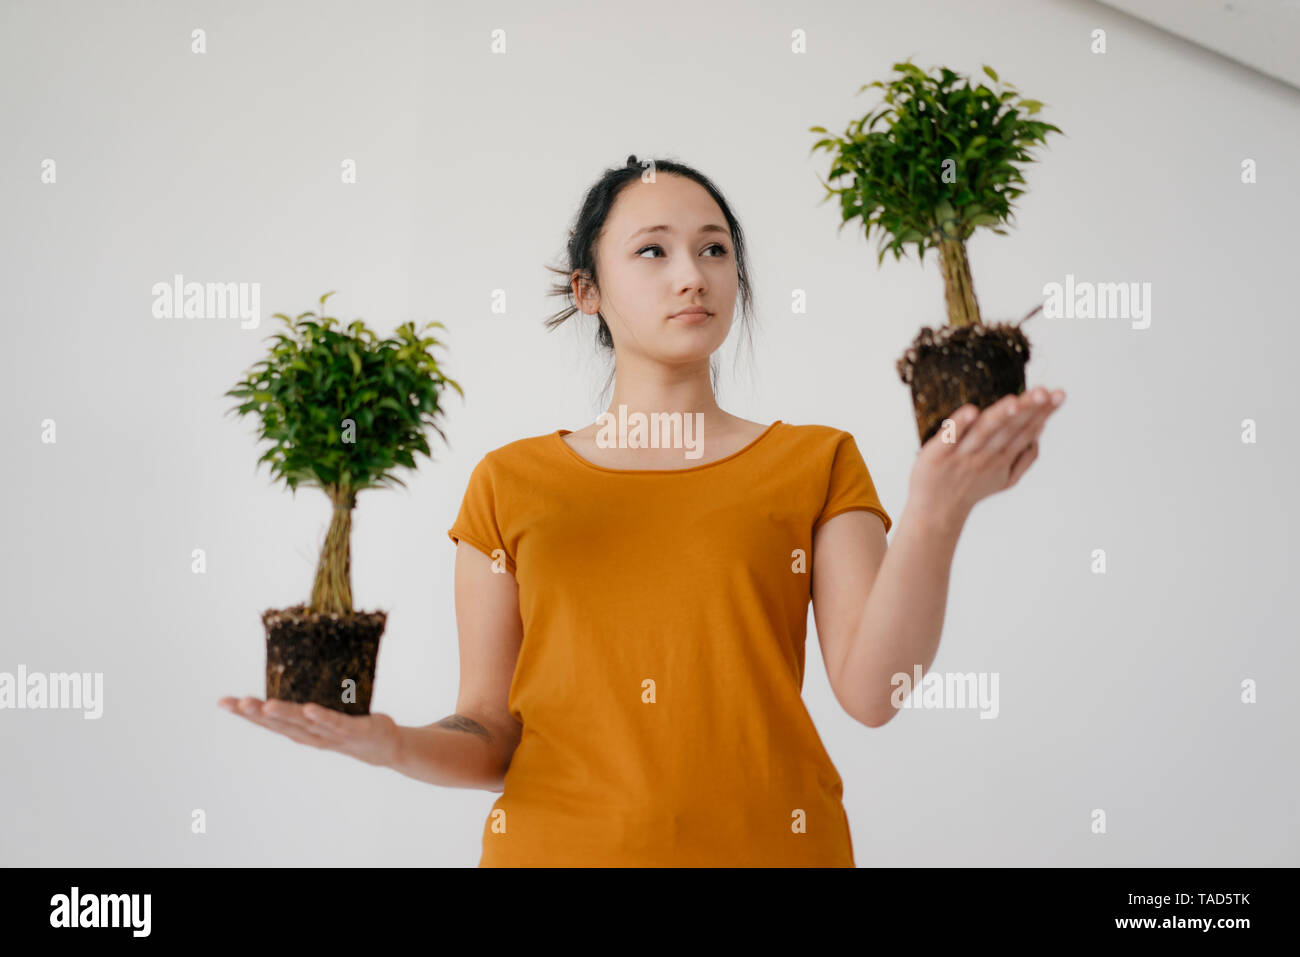 Young woman holding two bonsai trees Stock Photo